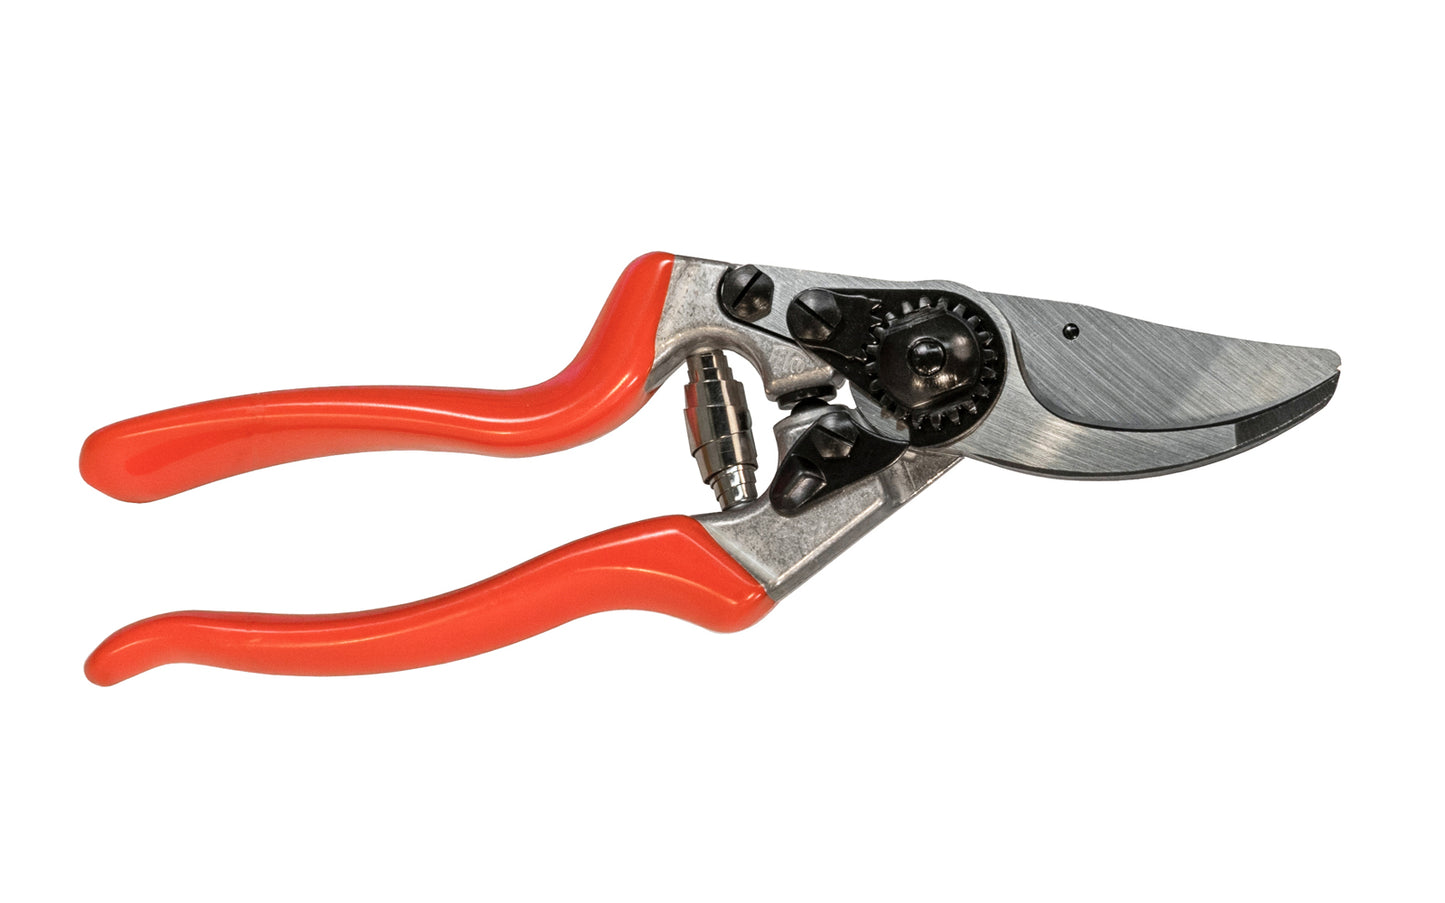 Made in Switzerland - Felco - Model 9 - Swiss Made Bypass pruner - Large Hand Size - The pruning shears / secateurs have a design which makes them ideal for heavy-duty cutting tasks - Cutting diameter capacity 1" (25 mm) - Blade is made of high-quality hardened steel - Spring loaded - Vinyl coated handle - Left Hand - 783929100074